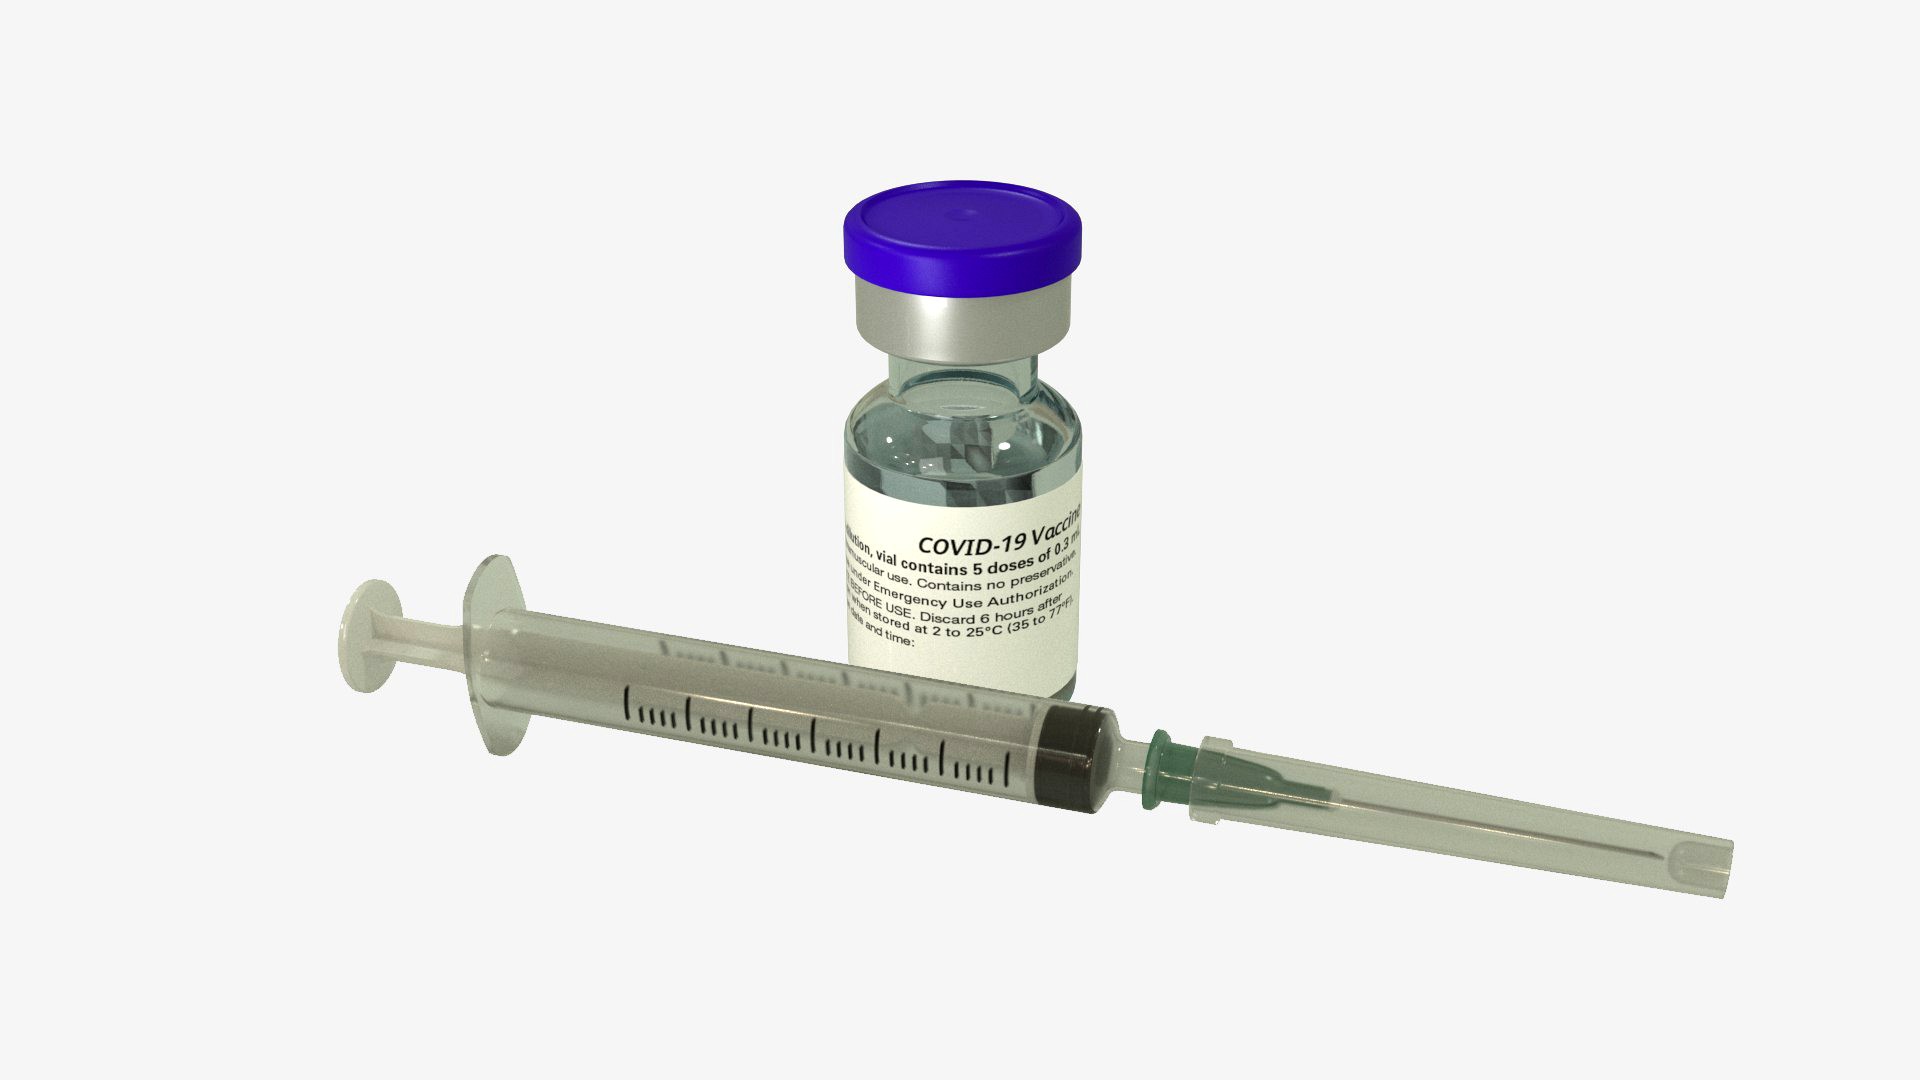 Low Dead Volume Syringe and Vaccine Vial